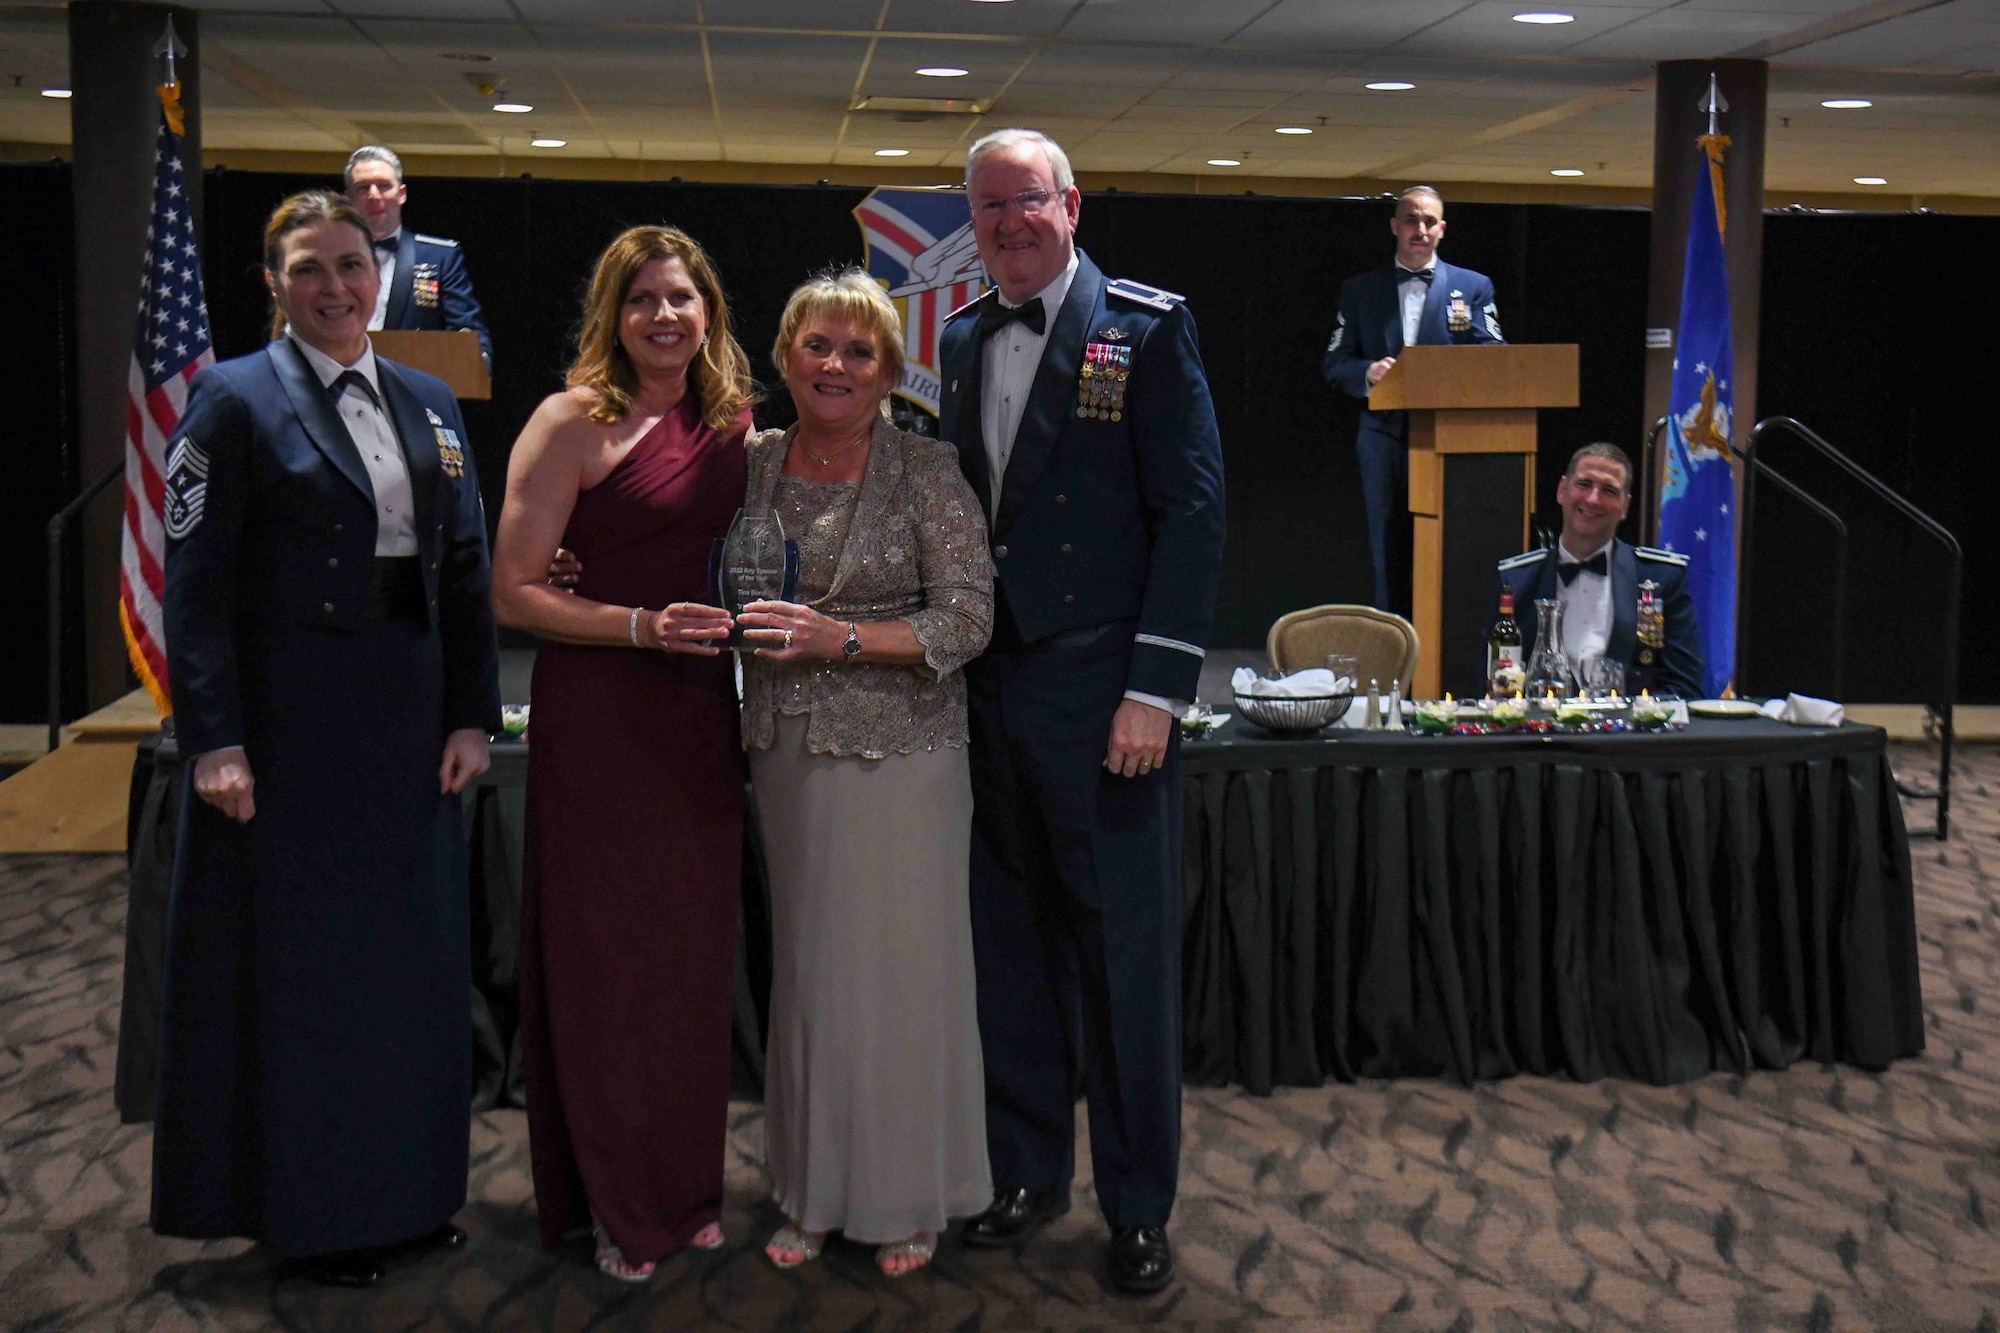 Tina Bond, a Key Spouse for the 910th Maintenance Squadron (center left), receives the 2022 Key Spouse of the Year award from 910th Airlift Wing Commander Col. Jeff Van Dootingh (right), his wife and 910th AW Key Spouse, Diana Van Dootingh (center right), and 910th AW Command Chief Master Sgt. Jennifer McKendree (left), during the unit’s annual awards banquet, March 4, 2023, at Youngstown Air Reserve Station, Ohio.